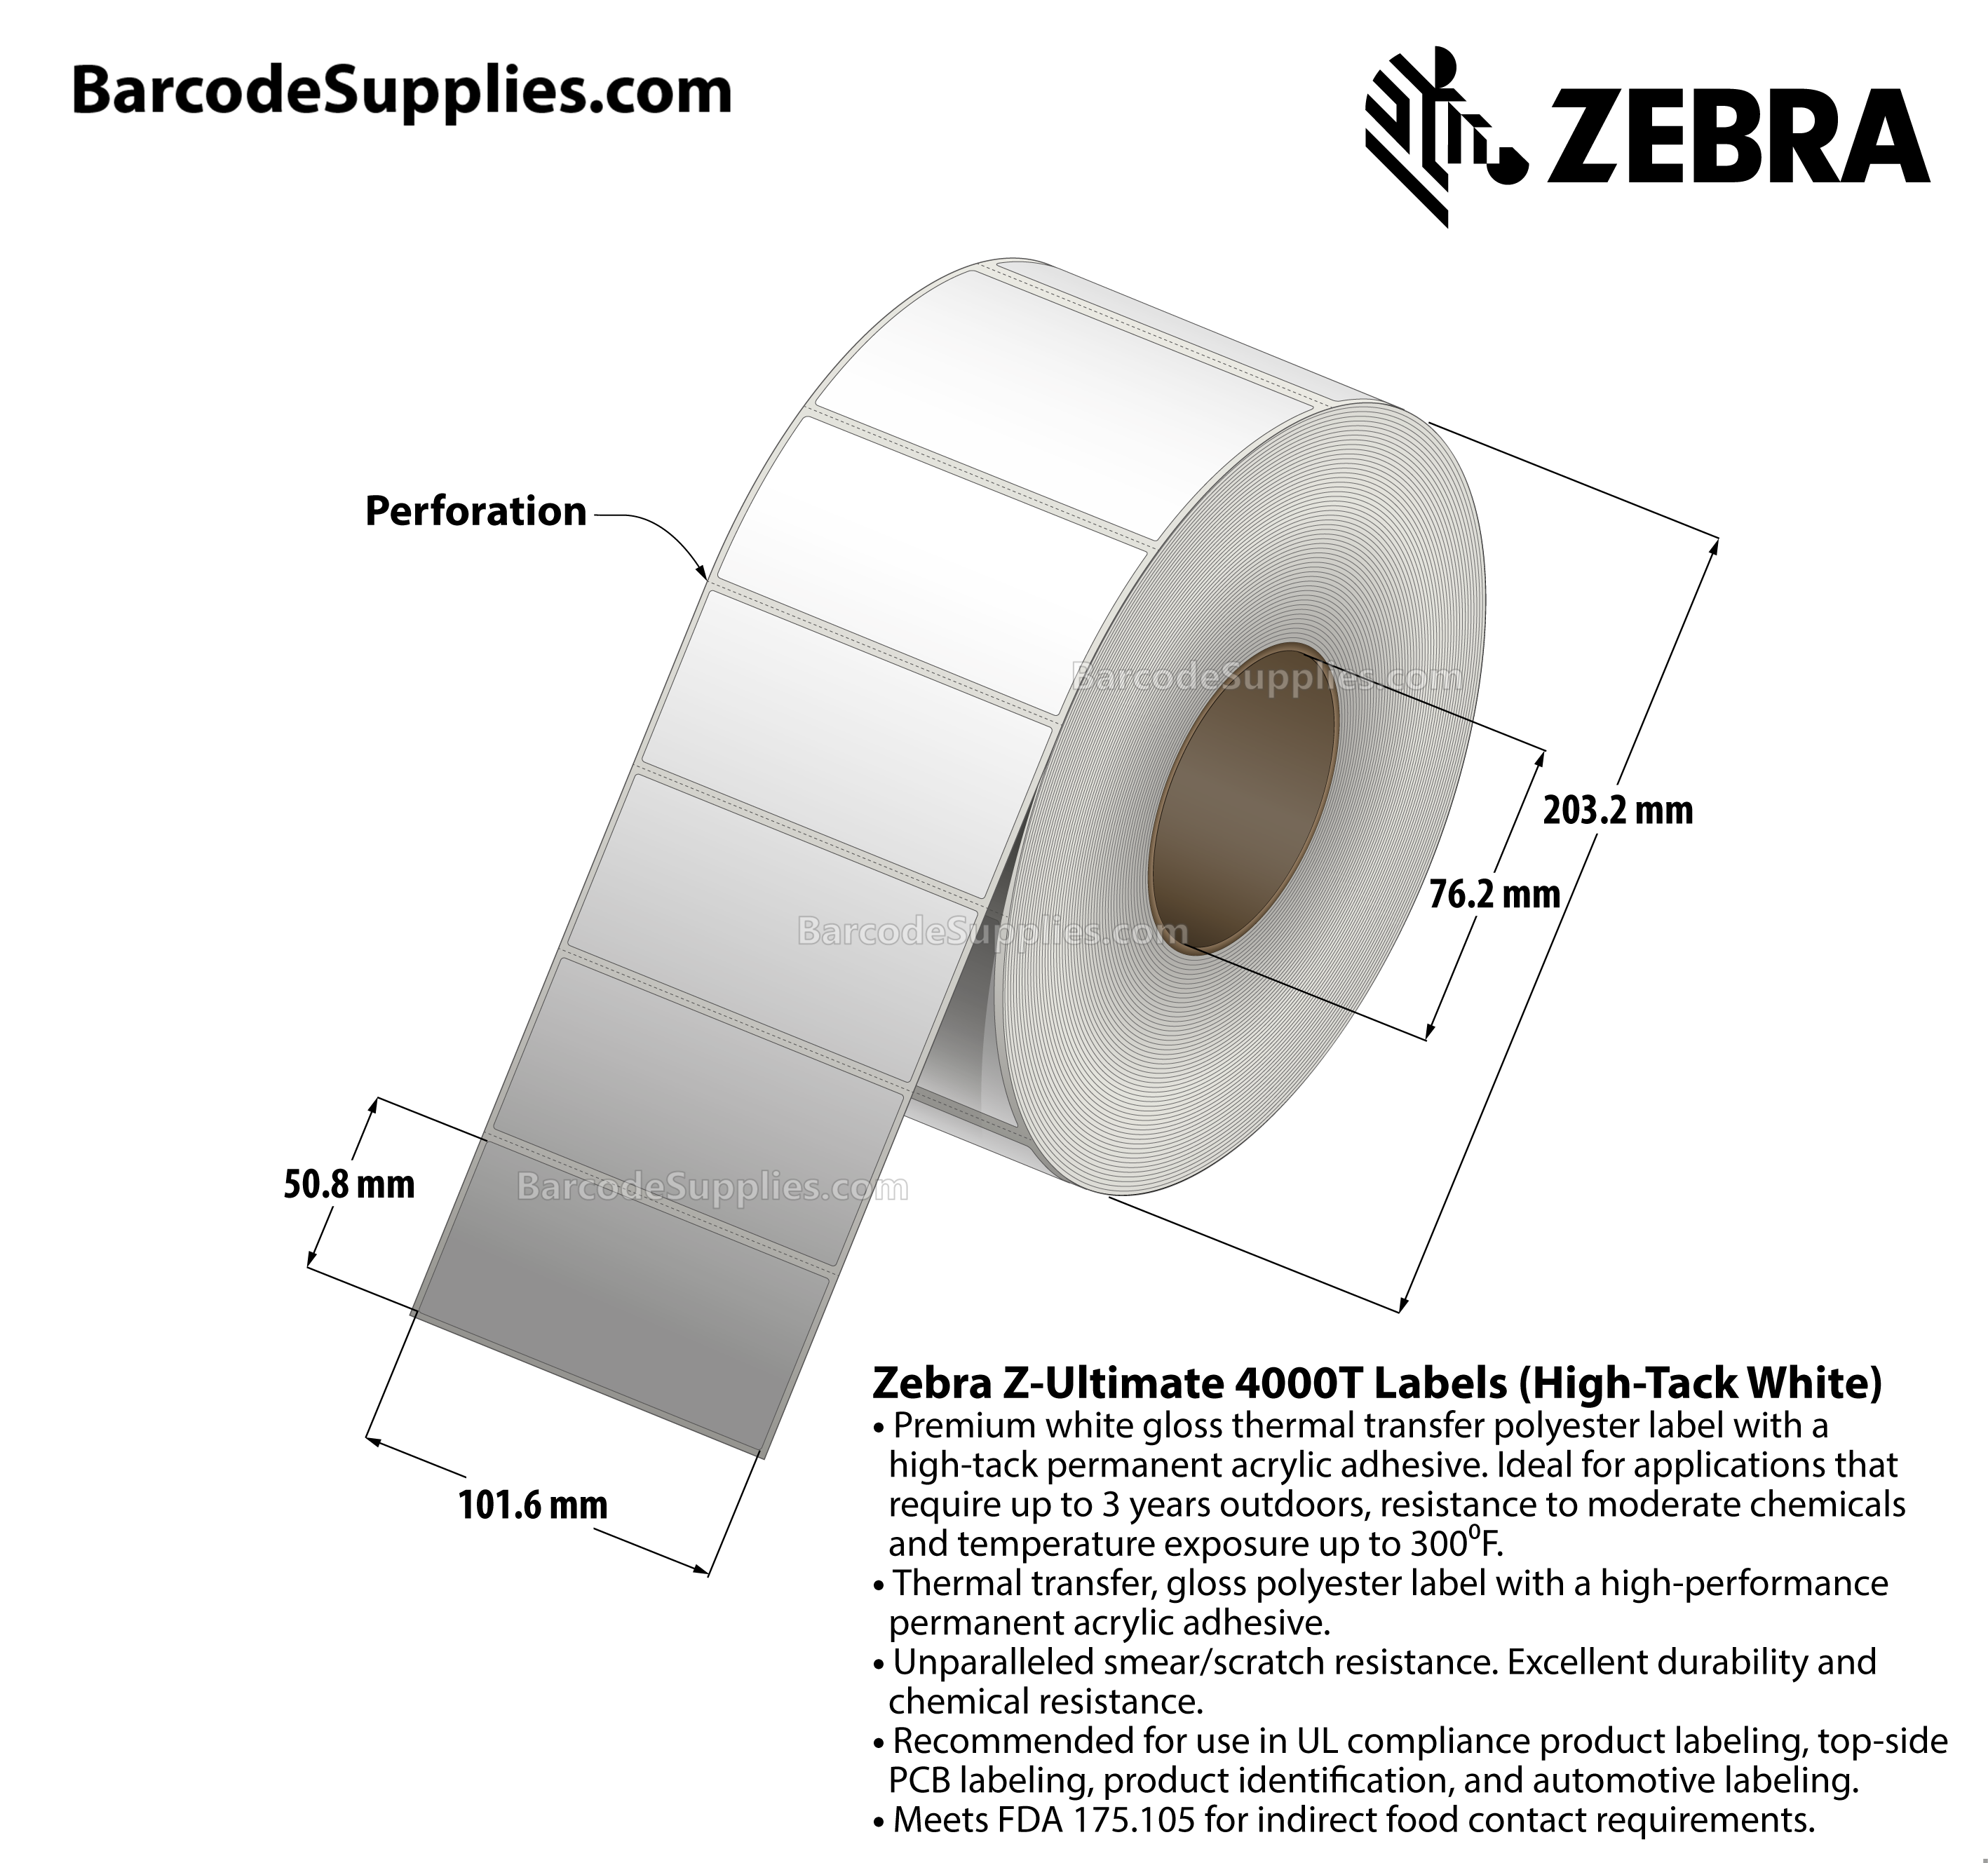 4 x 2 Thermal Transfer White Z-Ultimate 4000T High-Tack White Labels With High-tack Adhesive - Perforated - 1000 Labels Per Roll - Carton Of 1 Rolls - 1000 Labels Total - MPN: 10023060